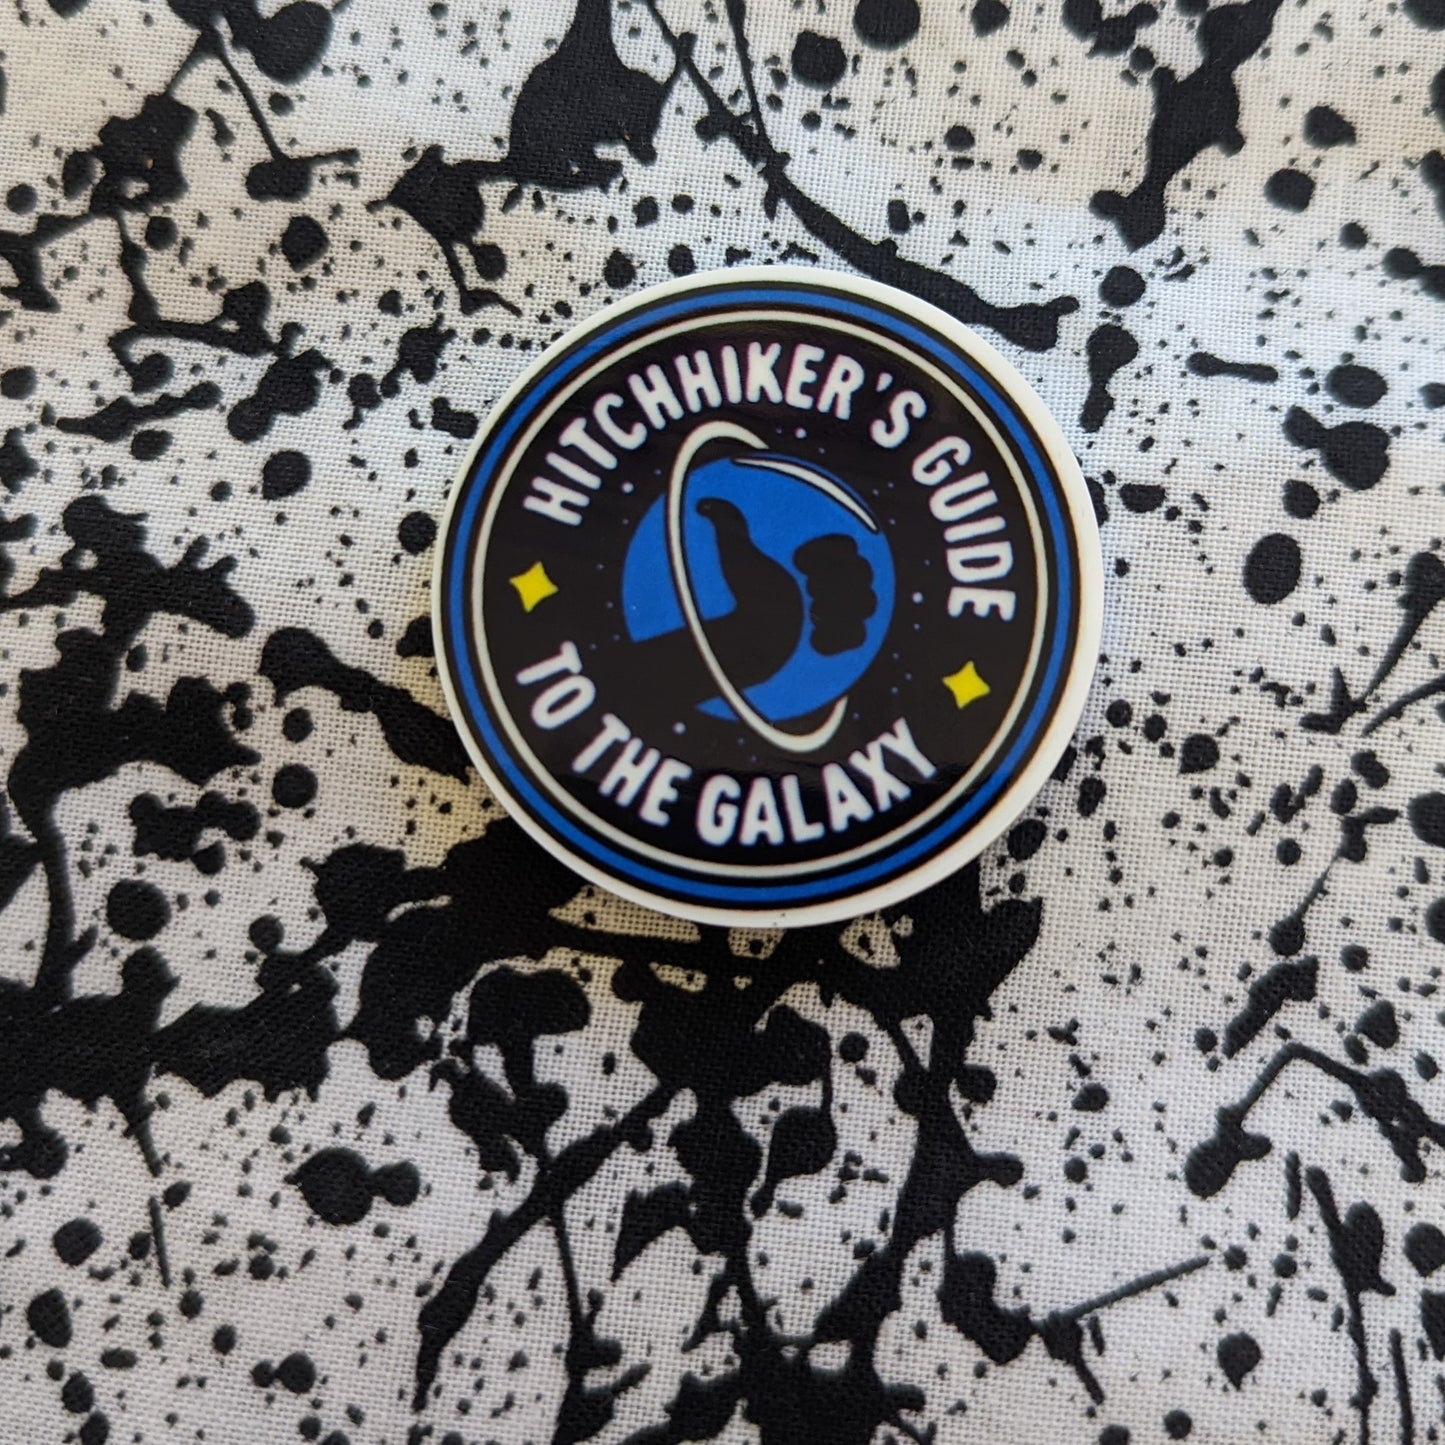 Hitchhiker's Guide pin